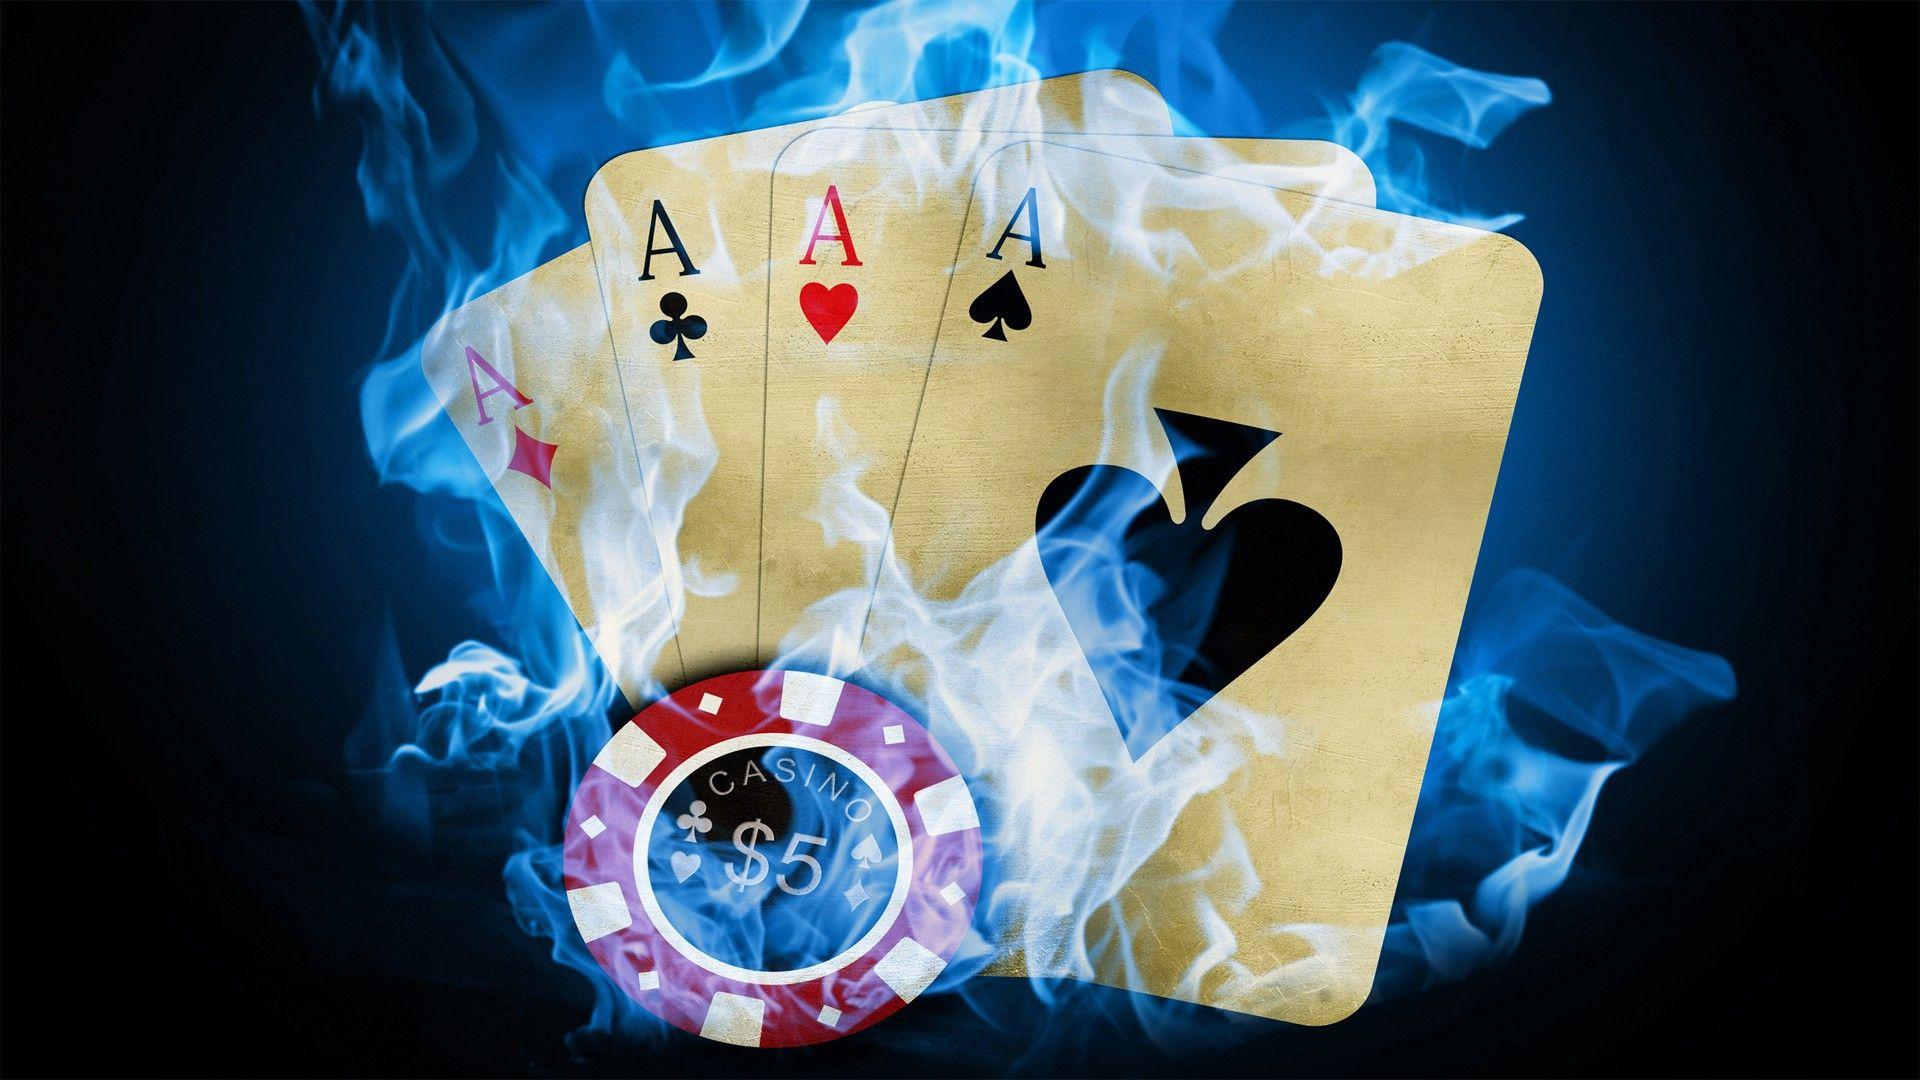 918kiss vs. Competing Online Casinos: An In-Depth Review